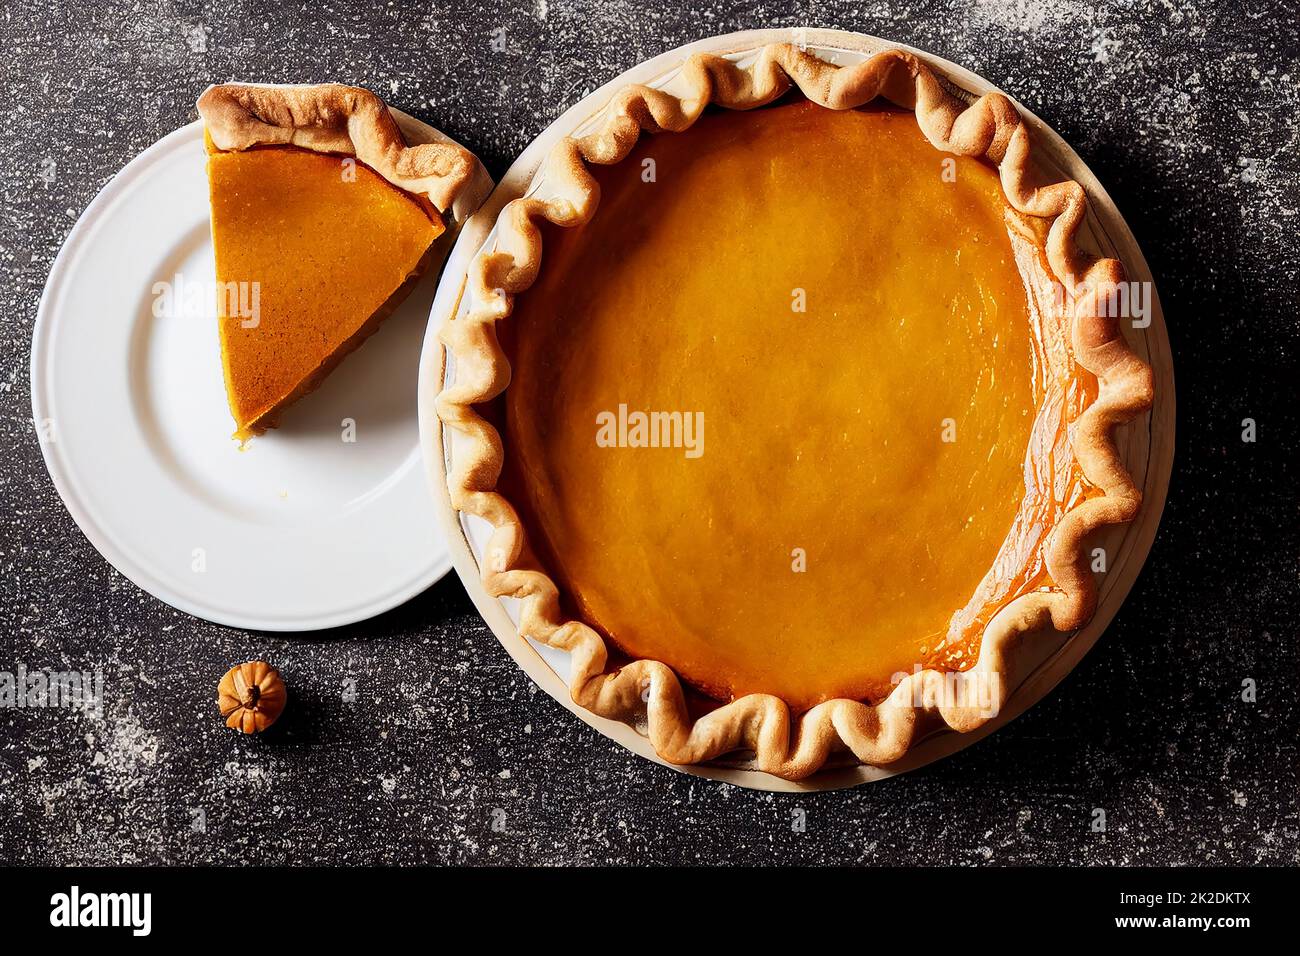 Sweet Homemade Thanksgiving pumpkin pie, traditional fall recipe idea, food photography and illustration Stock Photo